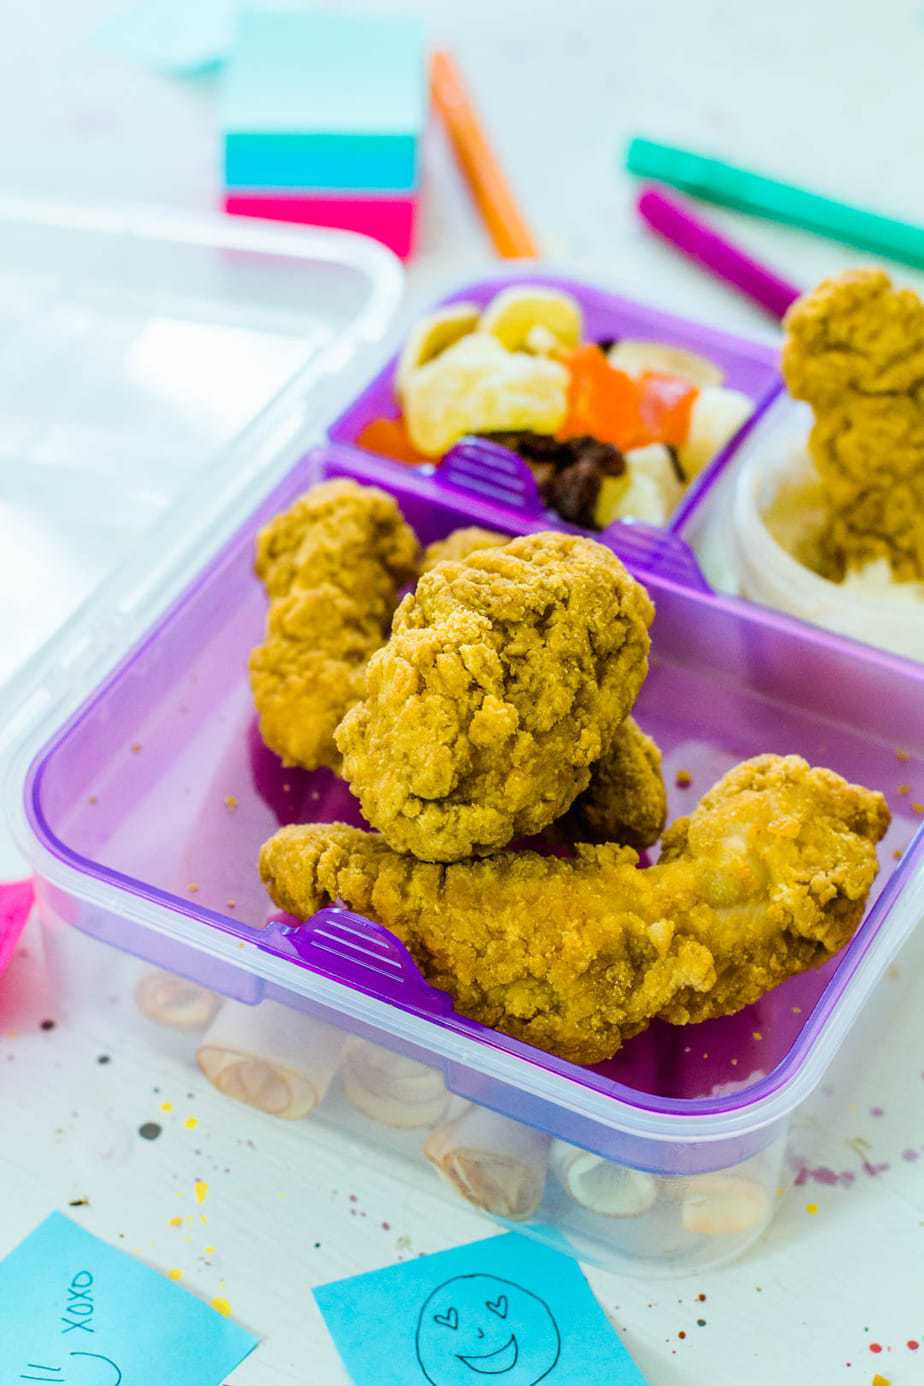 Bento Box Chicken Sandwich - Fun & Nutritious Lunchbox Recipe for Kids —  Crooked Recipes